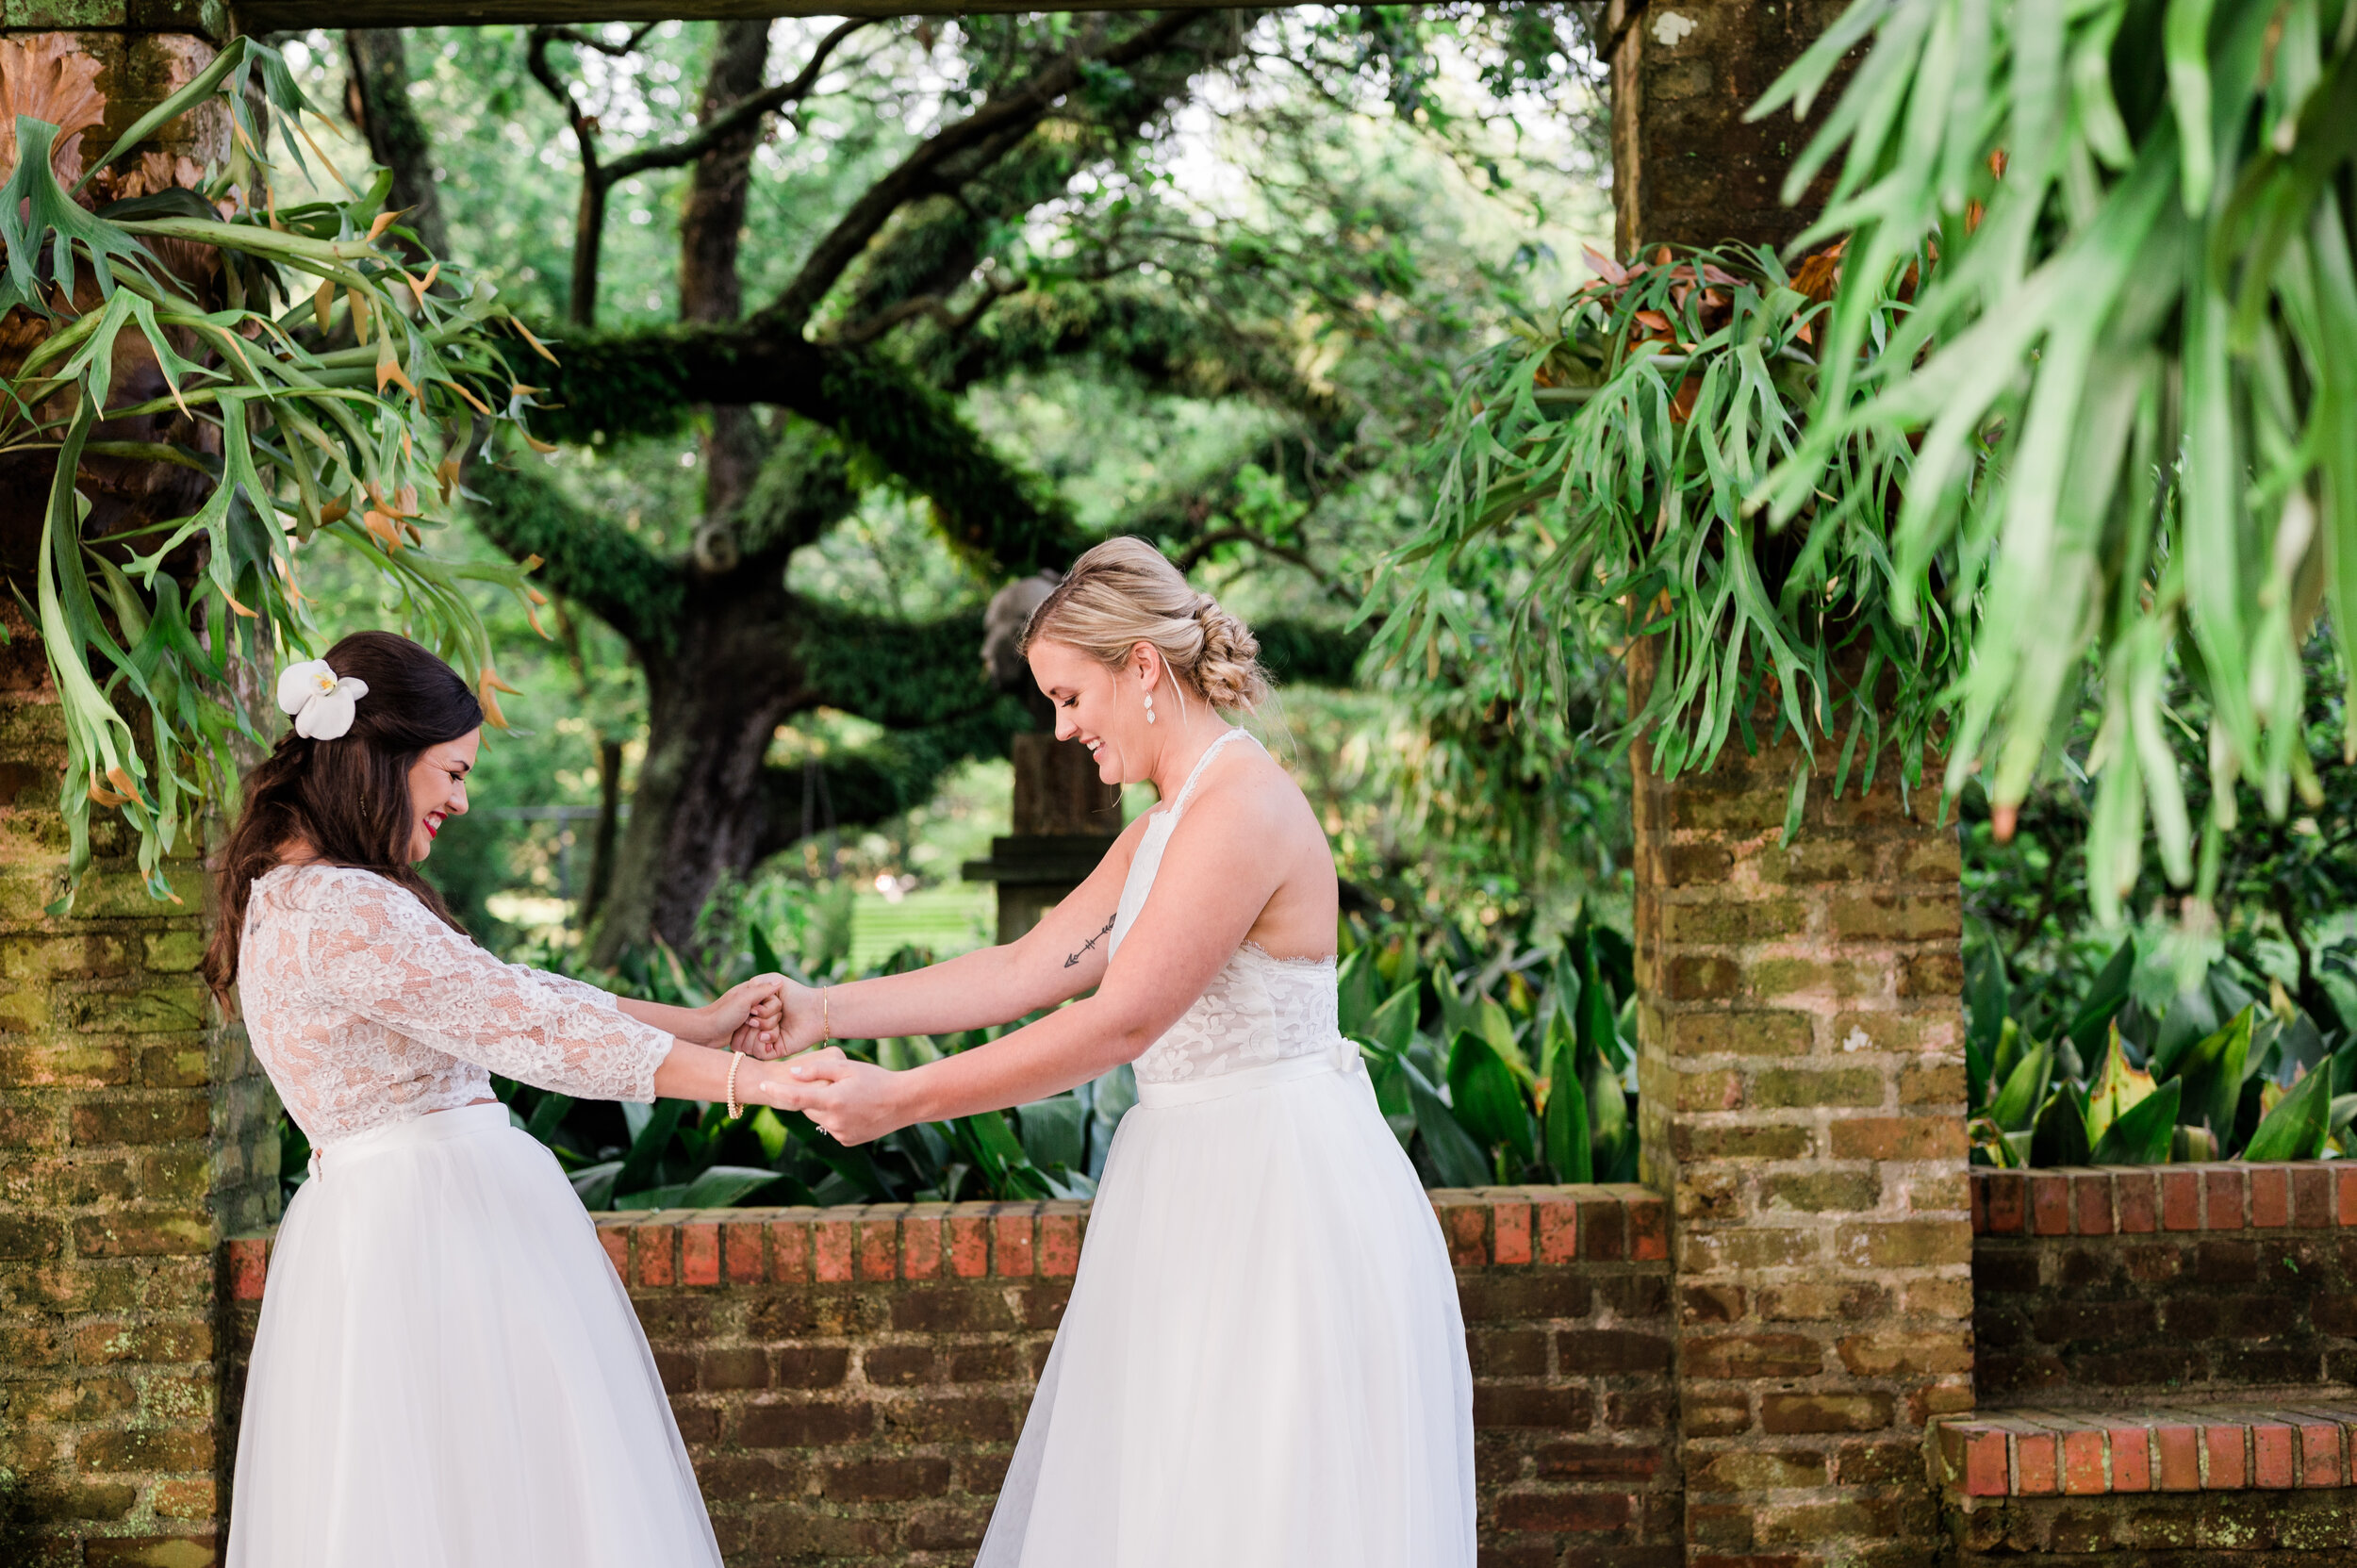  Elopement in the Botanical Gardens 